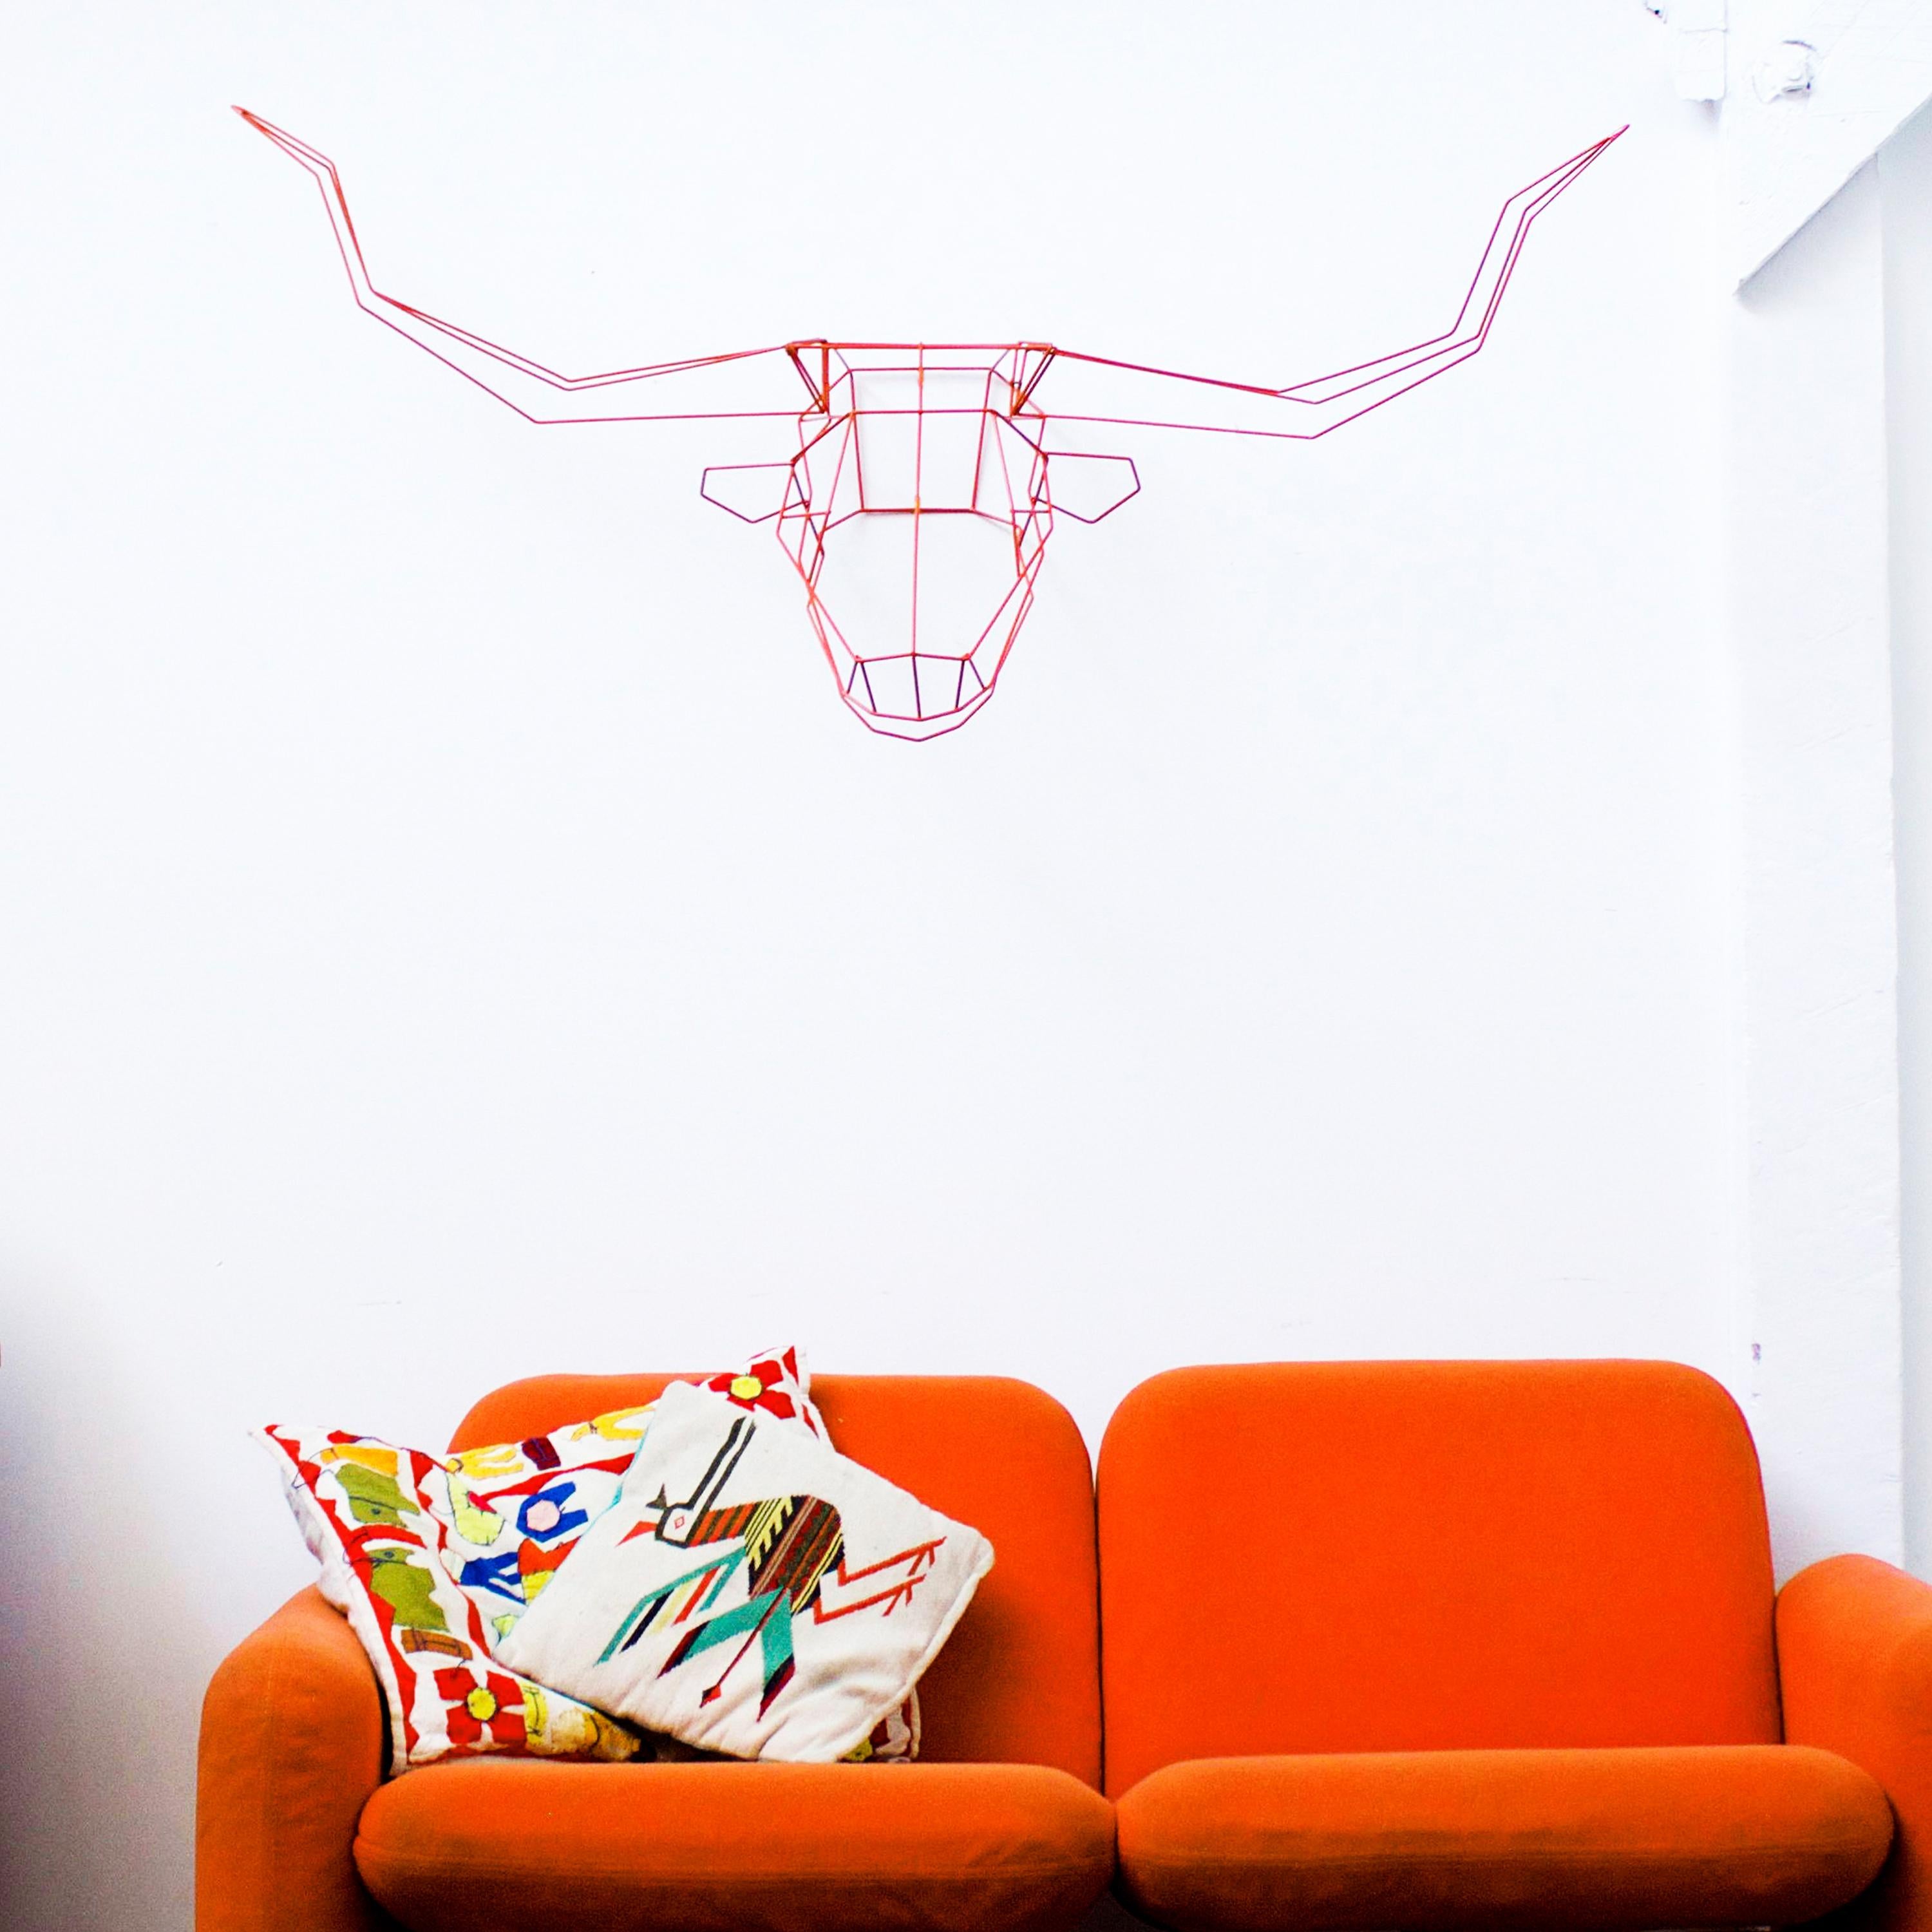 Plated Animal Sculpture, Wall Art, the Long Horn by Bend Goods, Orange